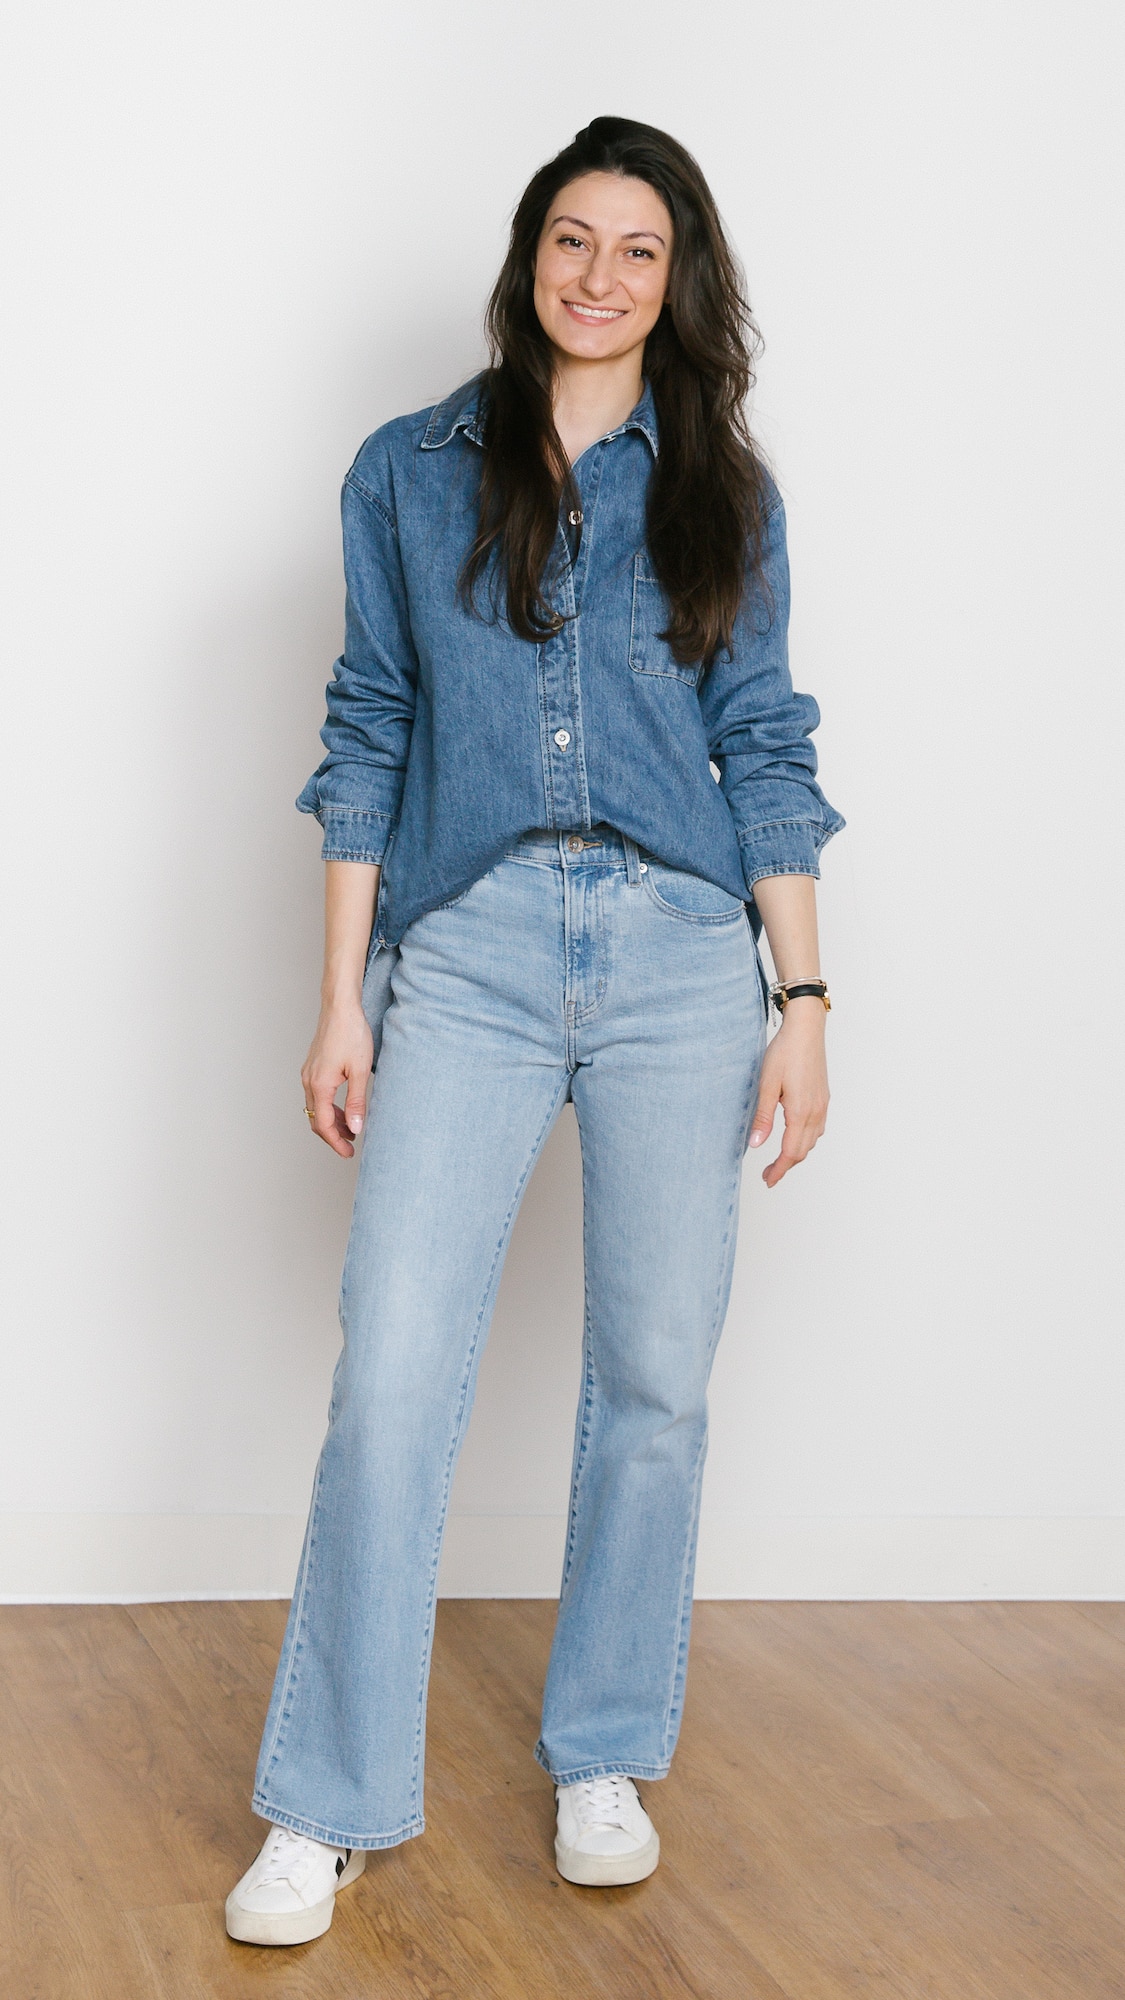 The perfect fit: it's in our jeans | Live shopping event with Polly ...